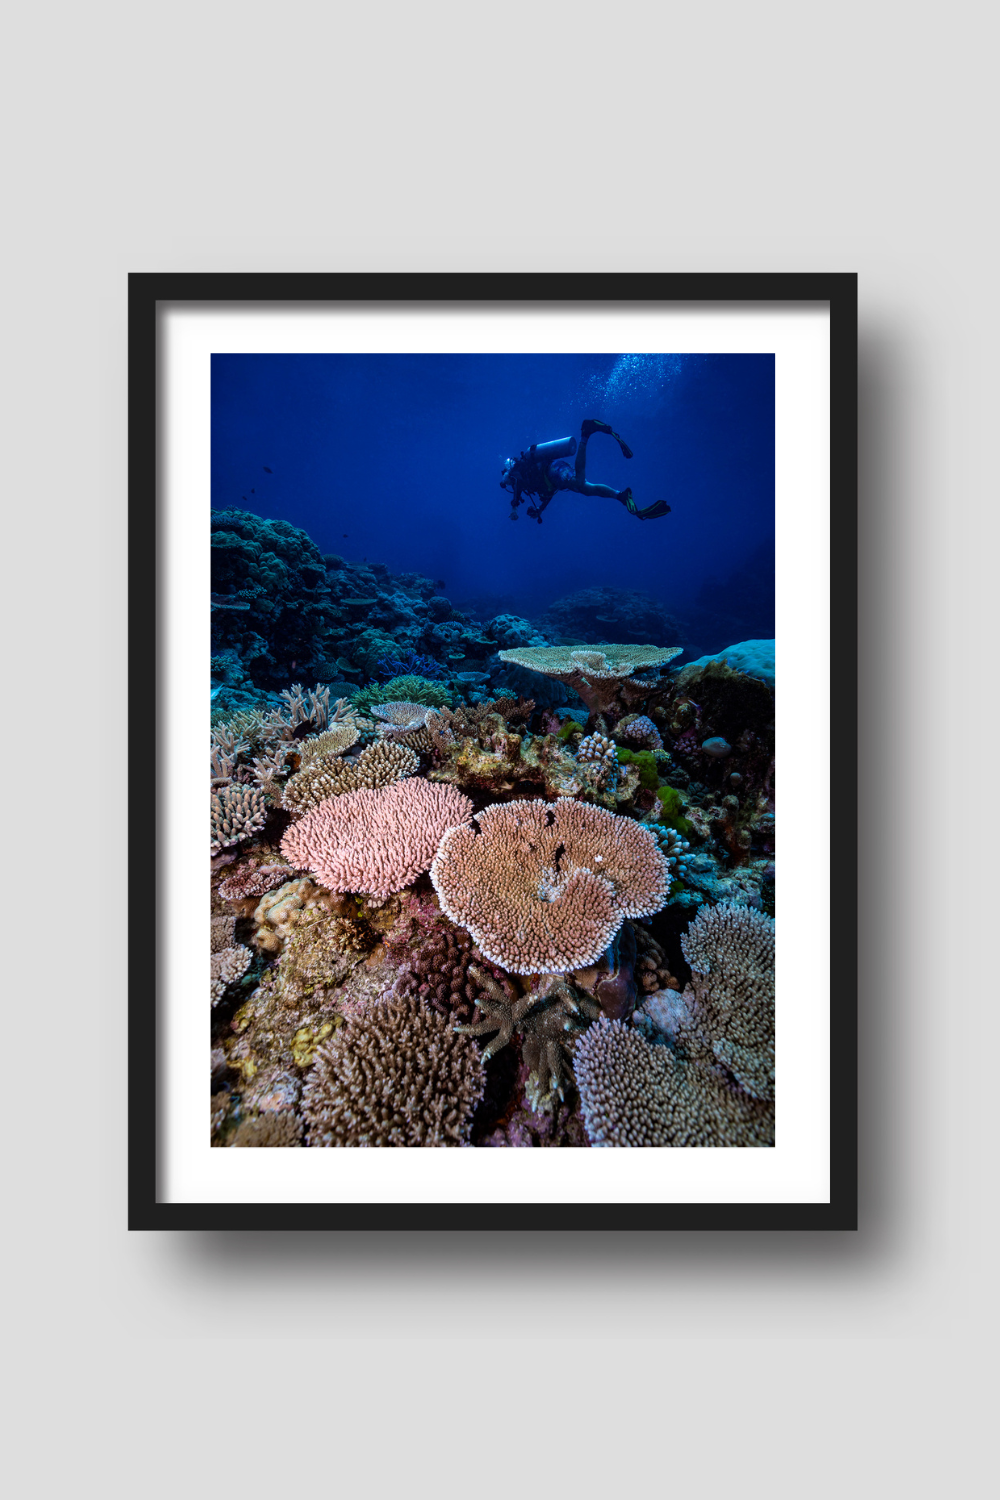 scuba diver releasing bubbles above a bed of coloured coral reef